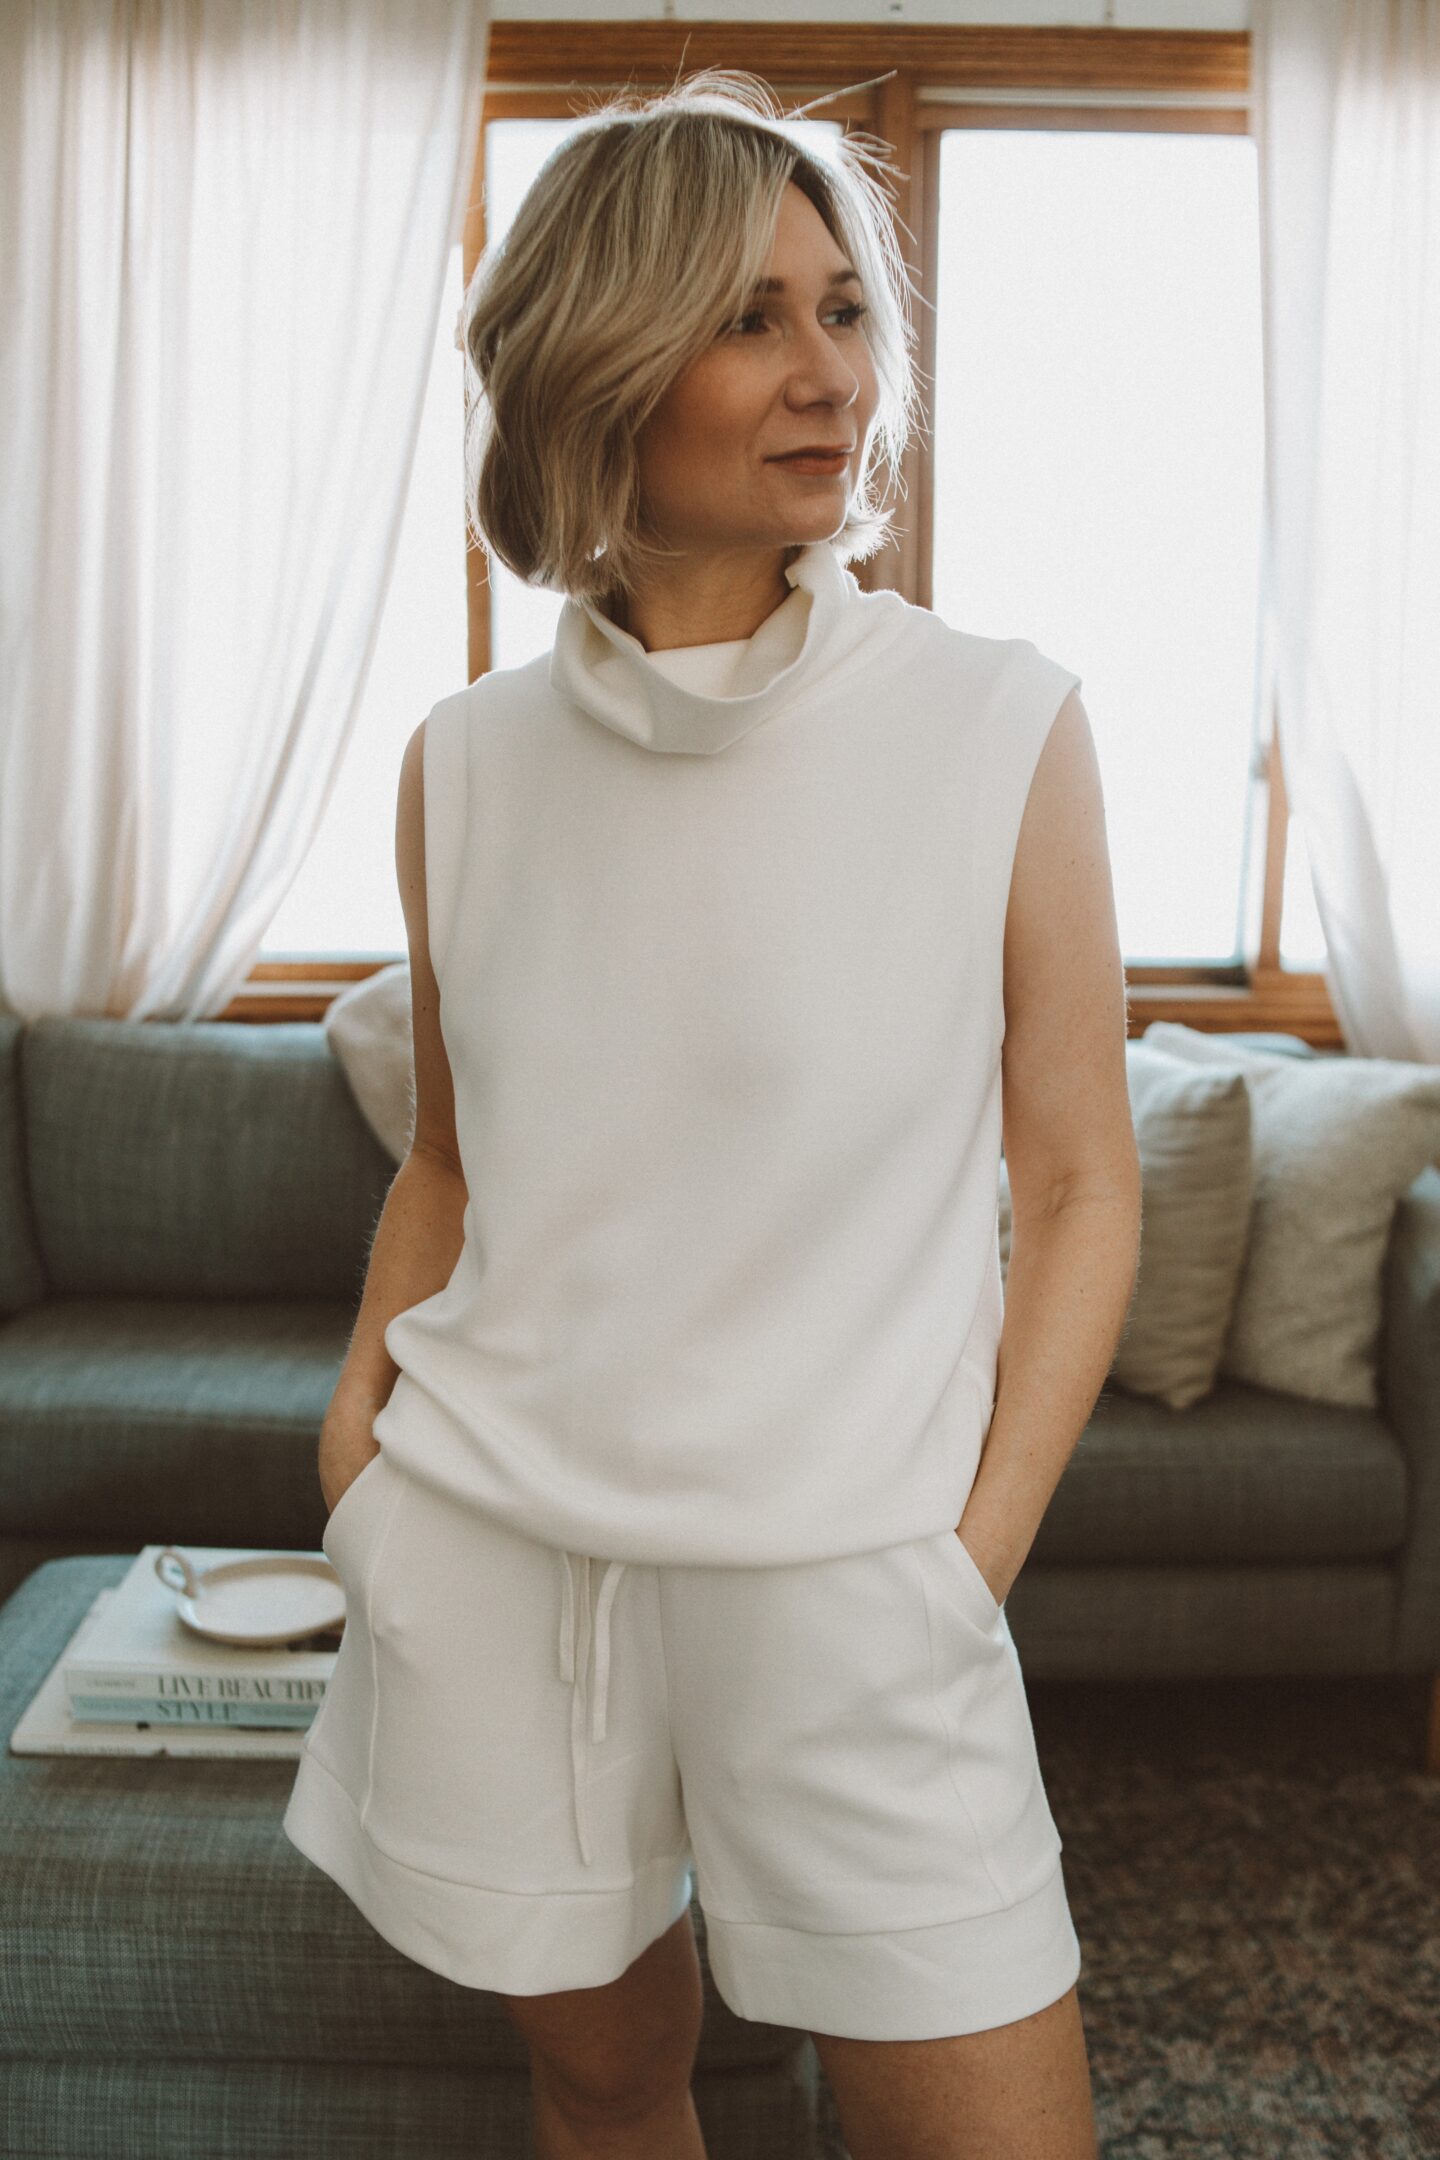 Karin Emily stands on her rug in front of her gray sofa and ottoman in her living room wearing a white top and shorts from Varley and shares the best style for spring from Varley